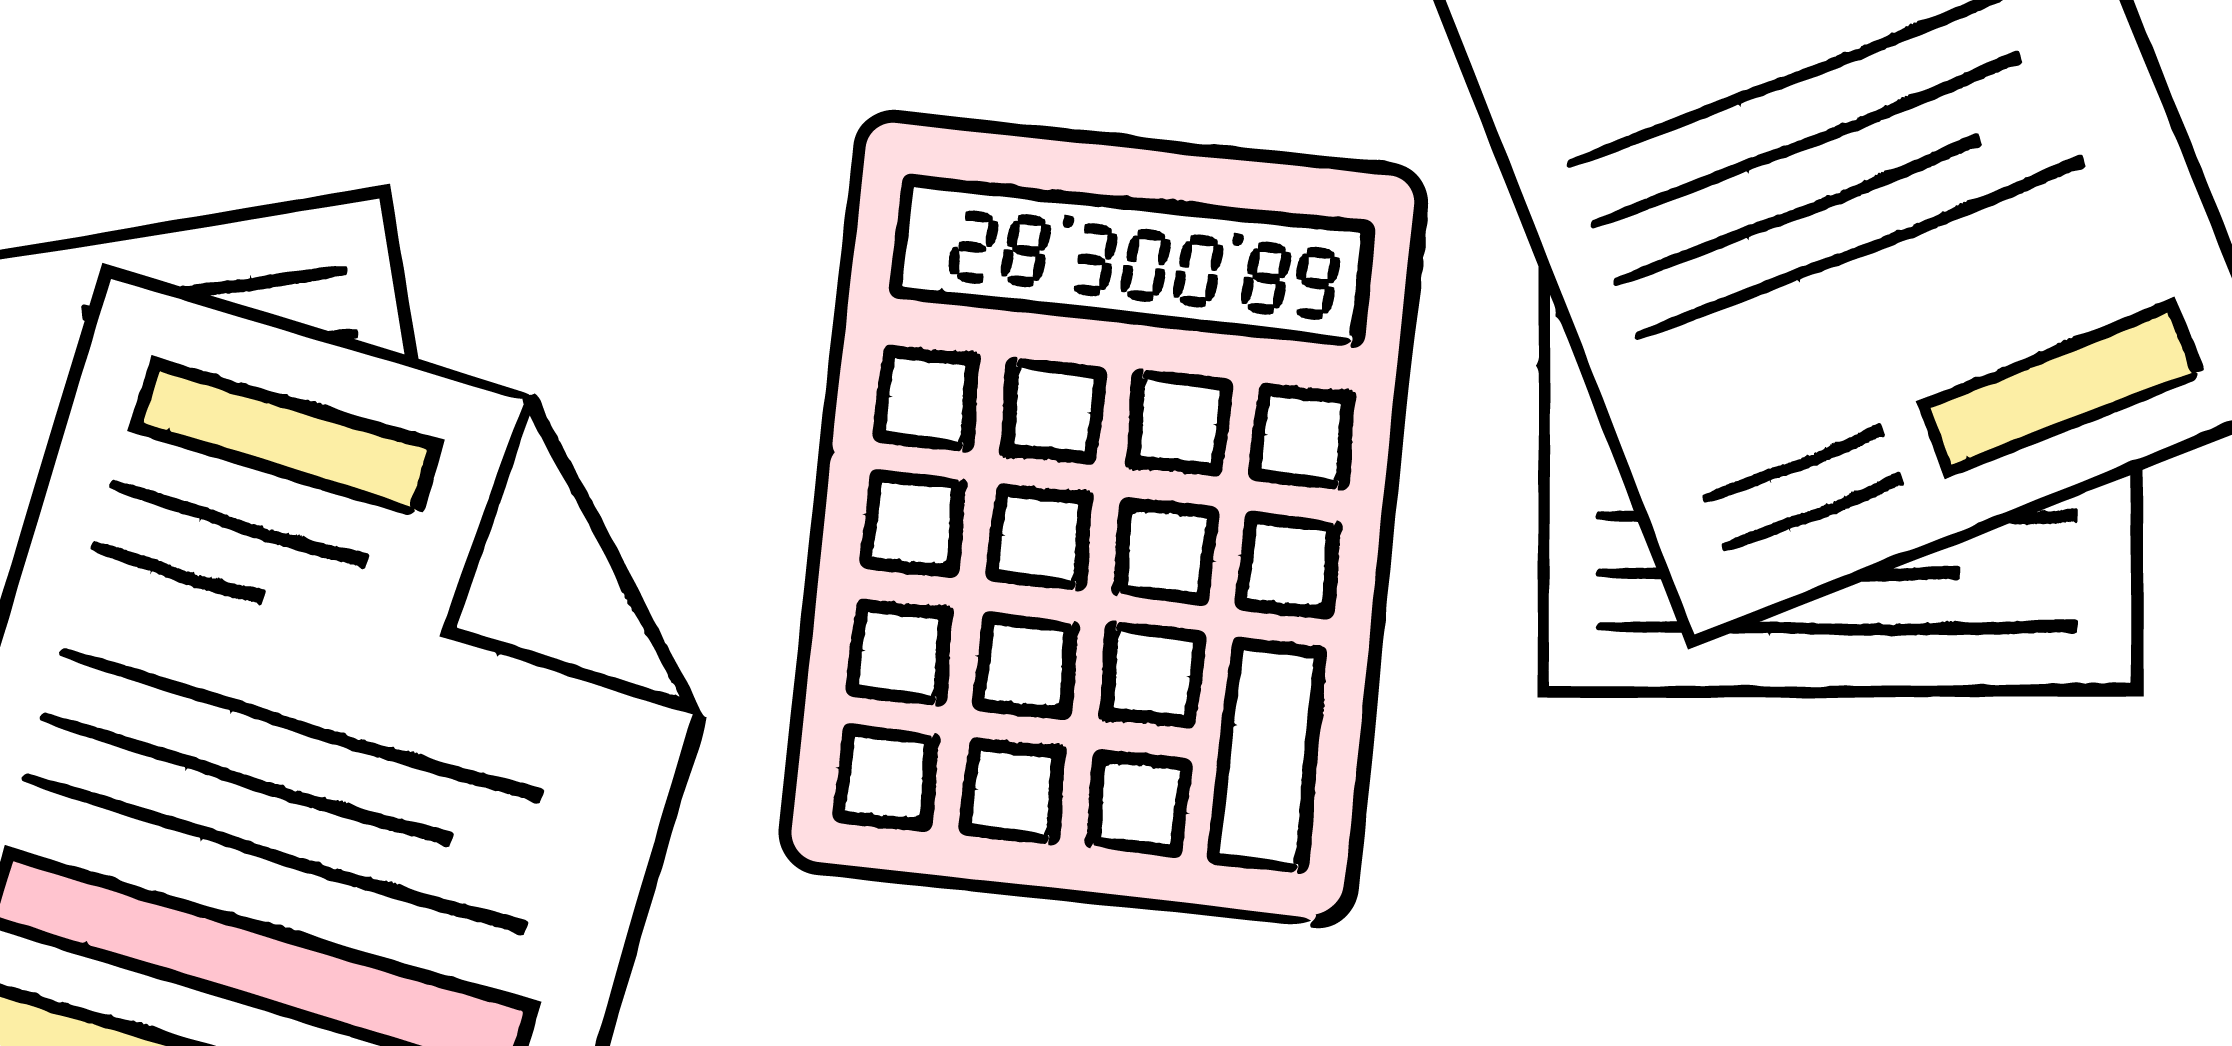 A calculator and notes